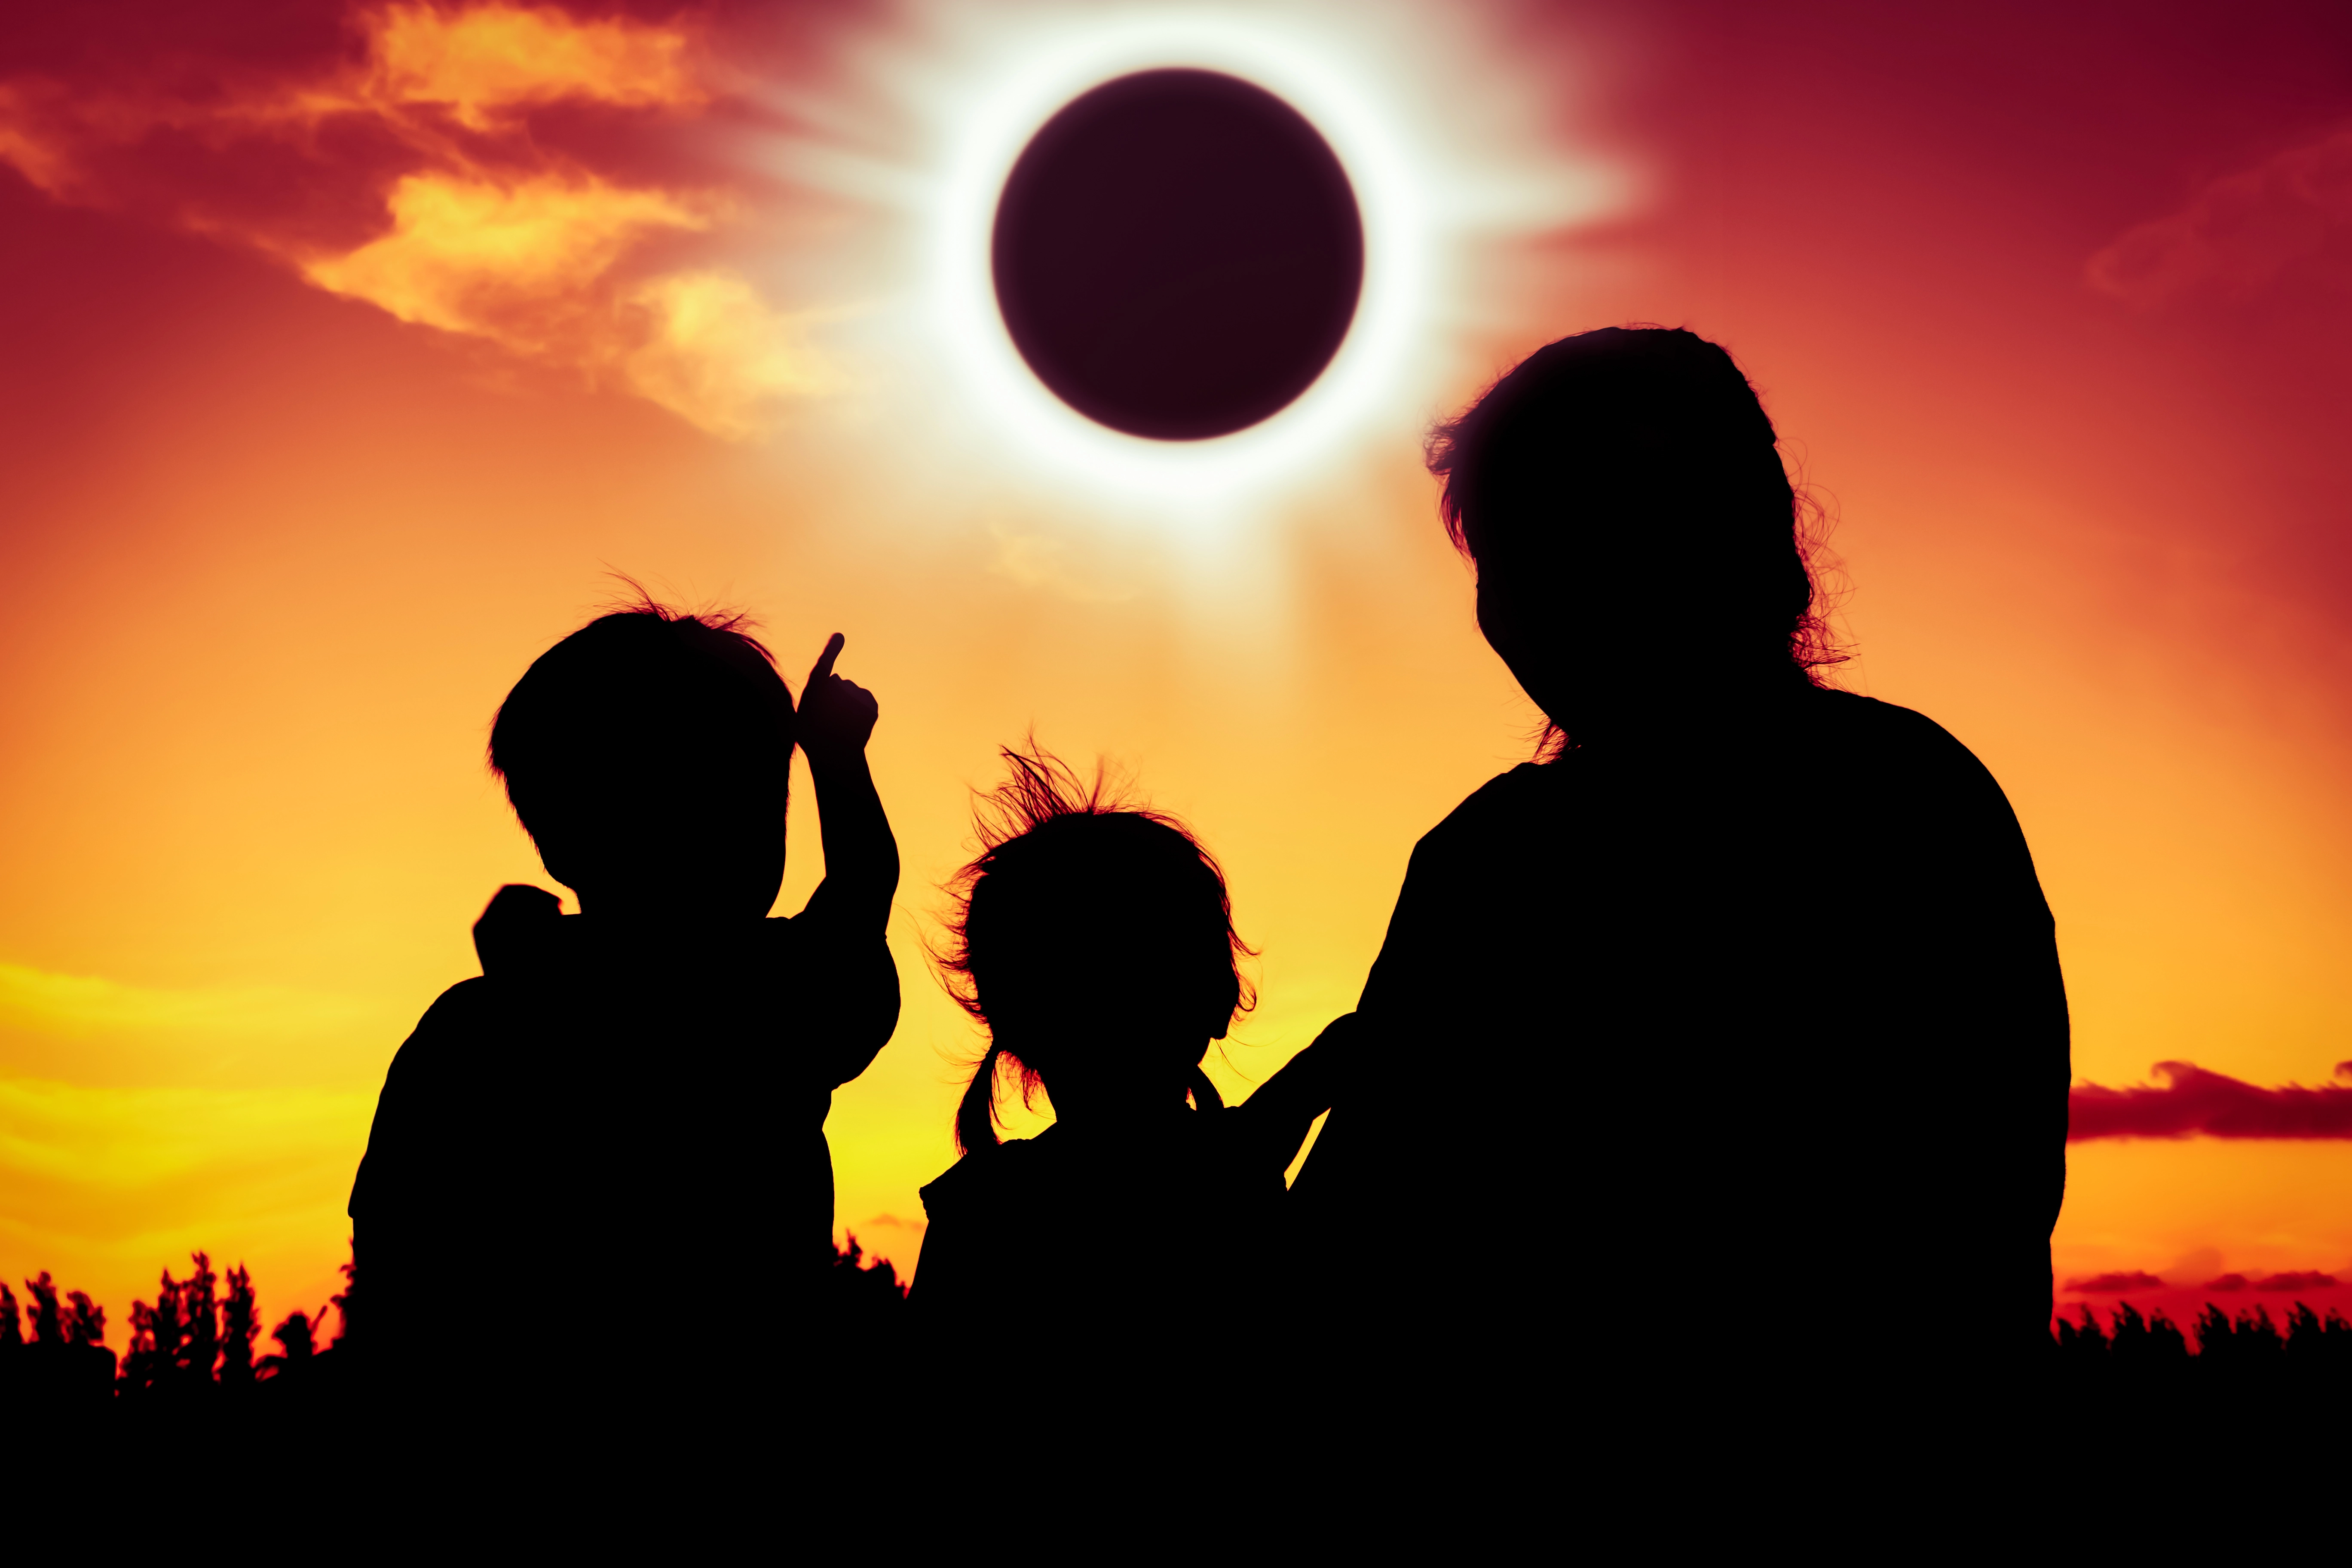 eclipse silhouettes